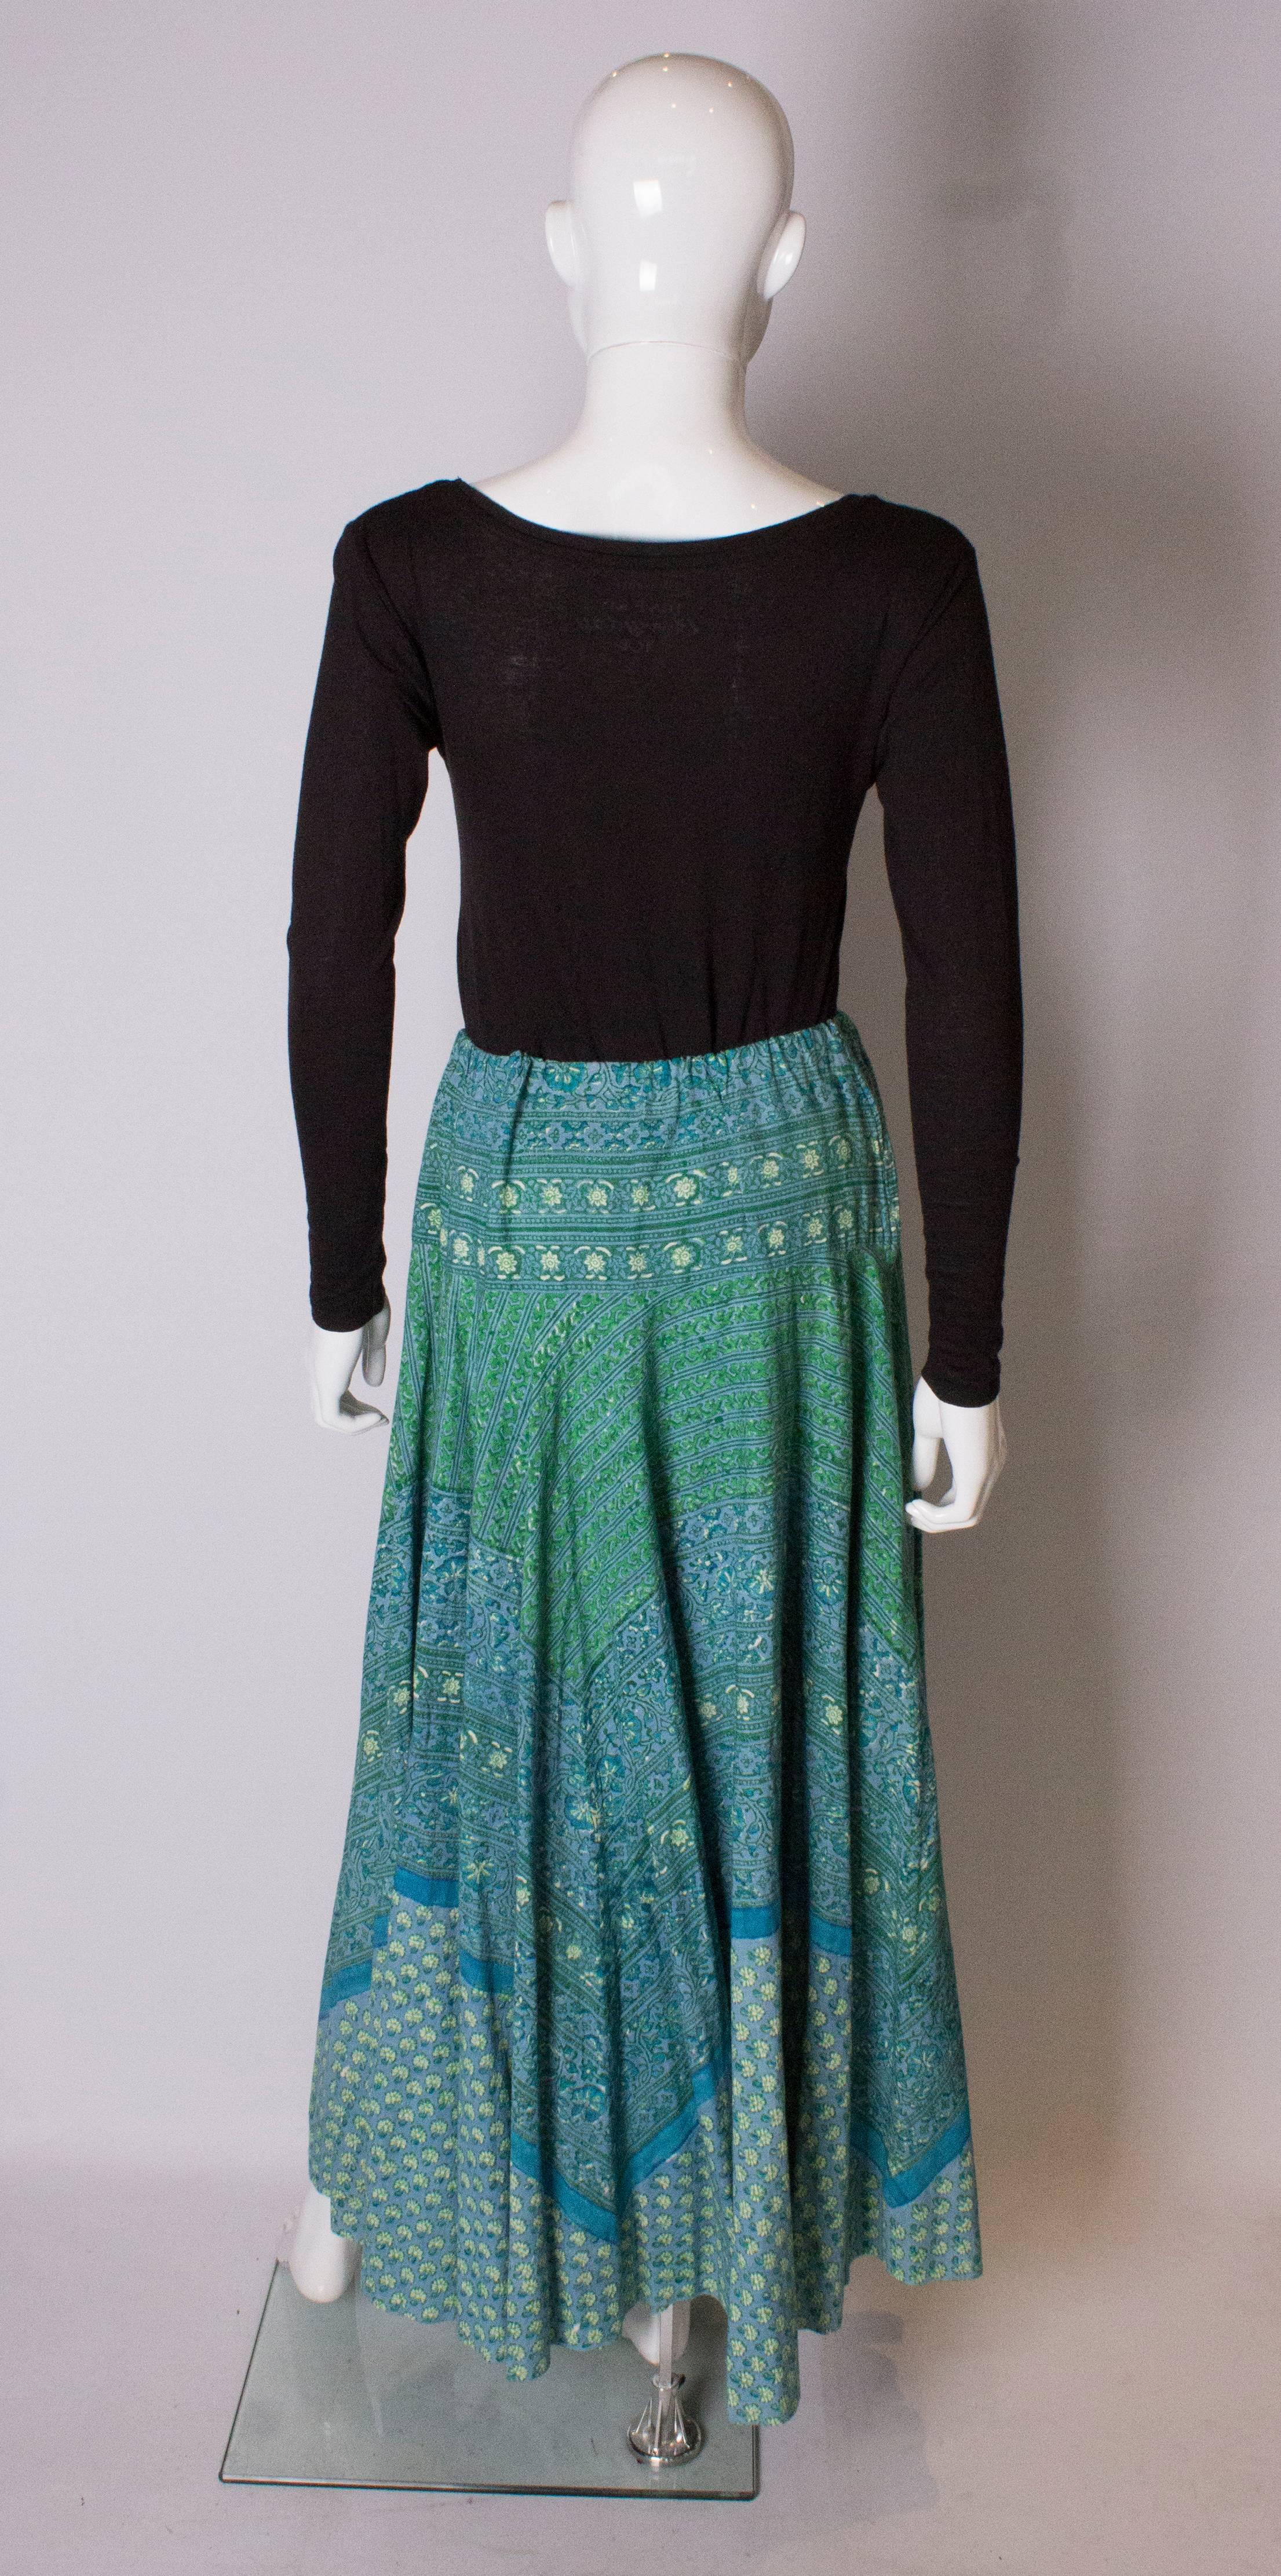 A Vintage 1970s floral printed Cotton Boho summer day Skirt 2